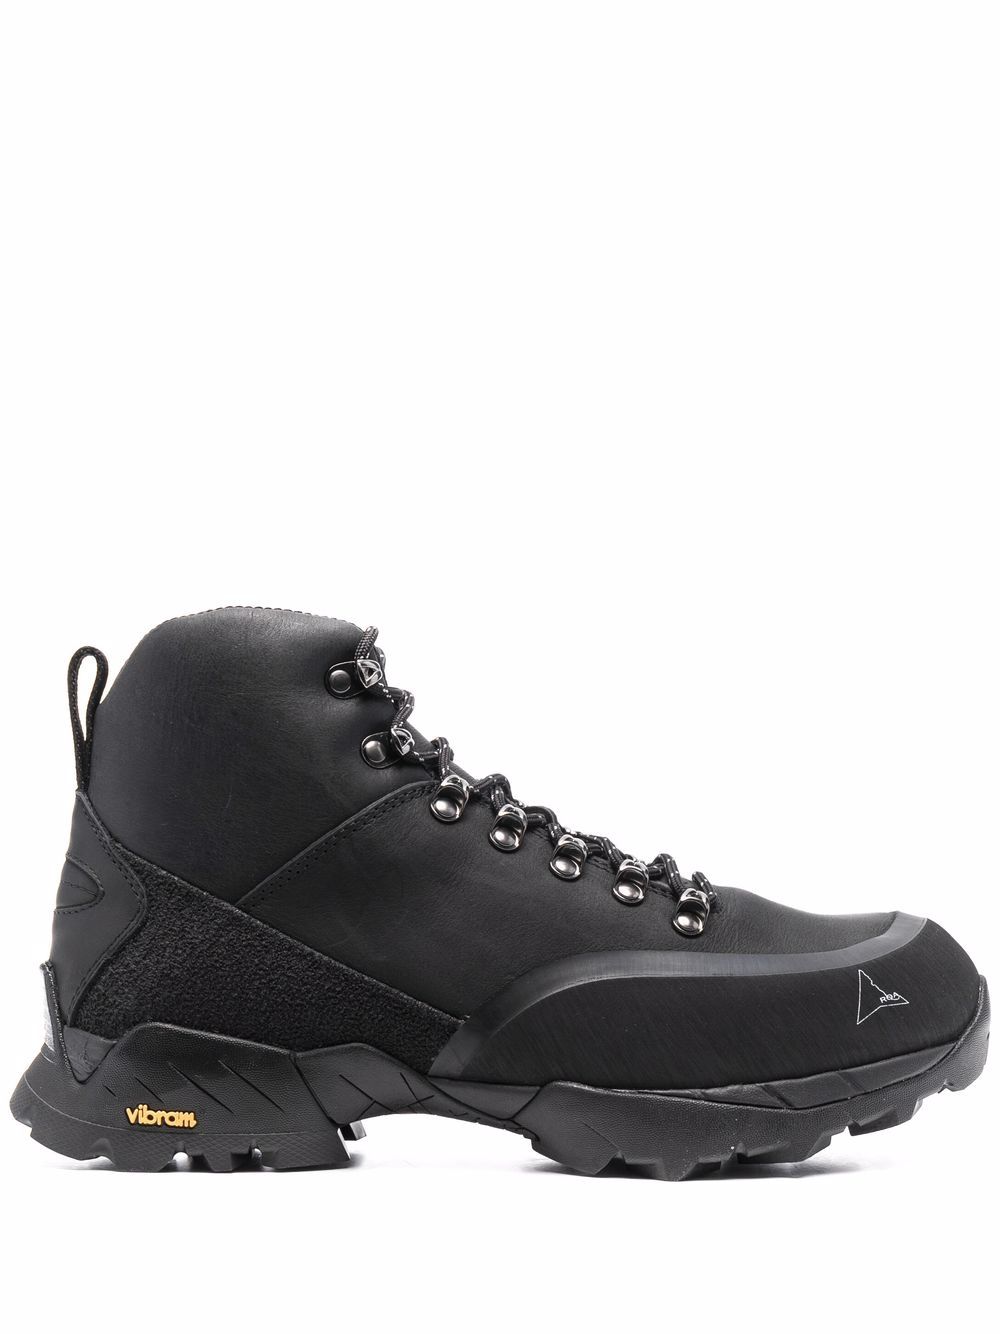 ROA Andreas lace-up hiking boots - Black